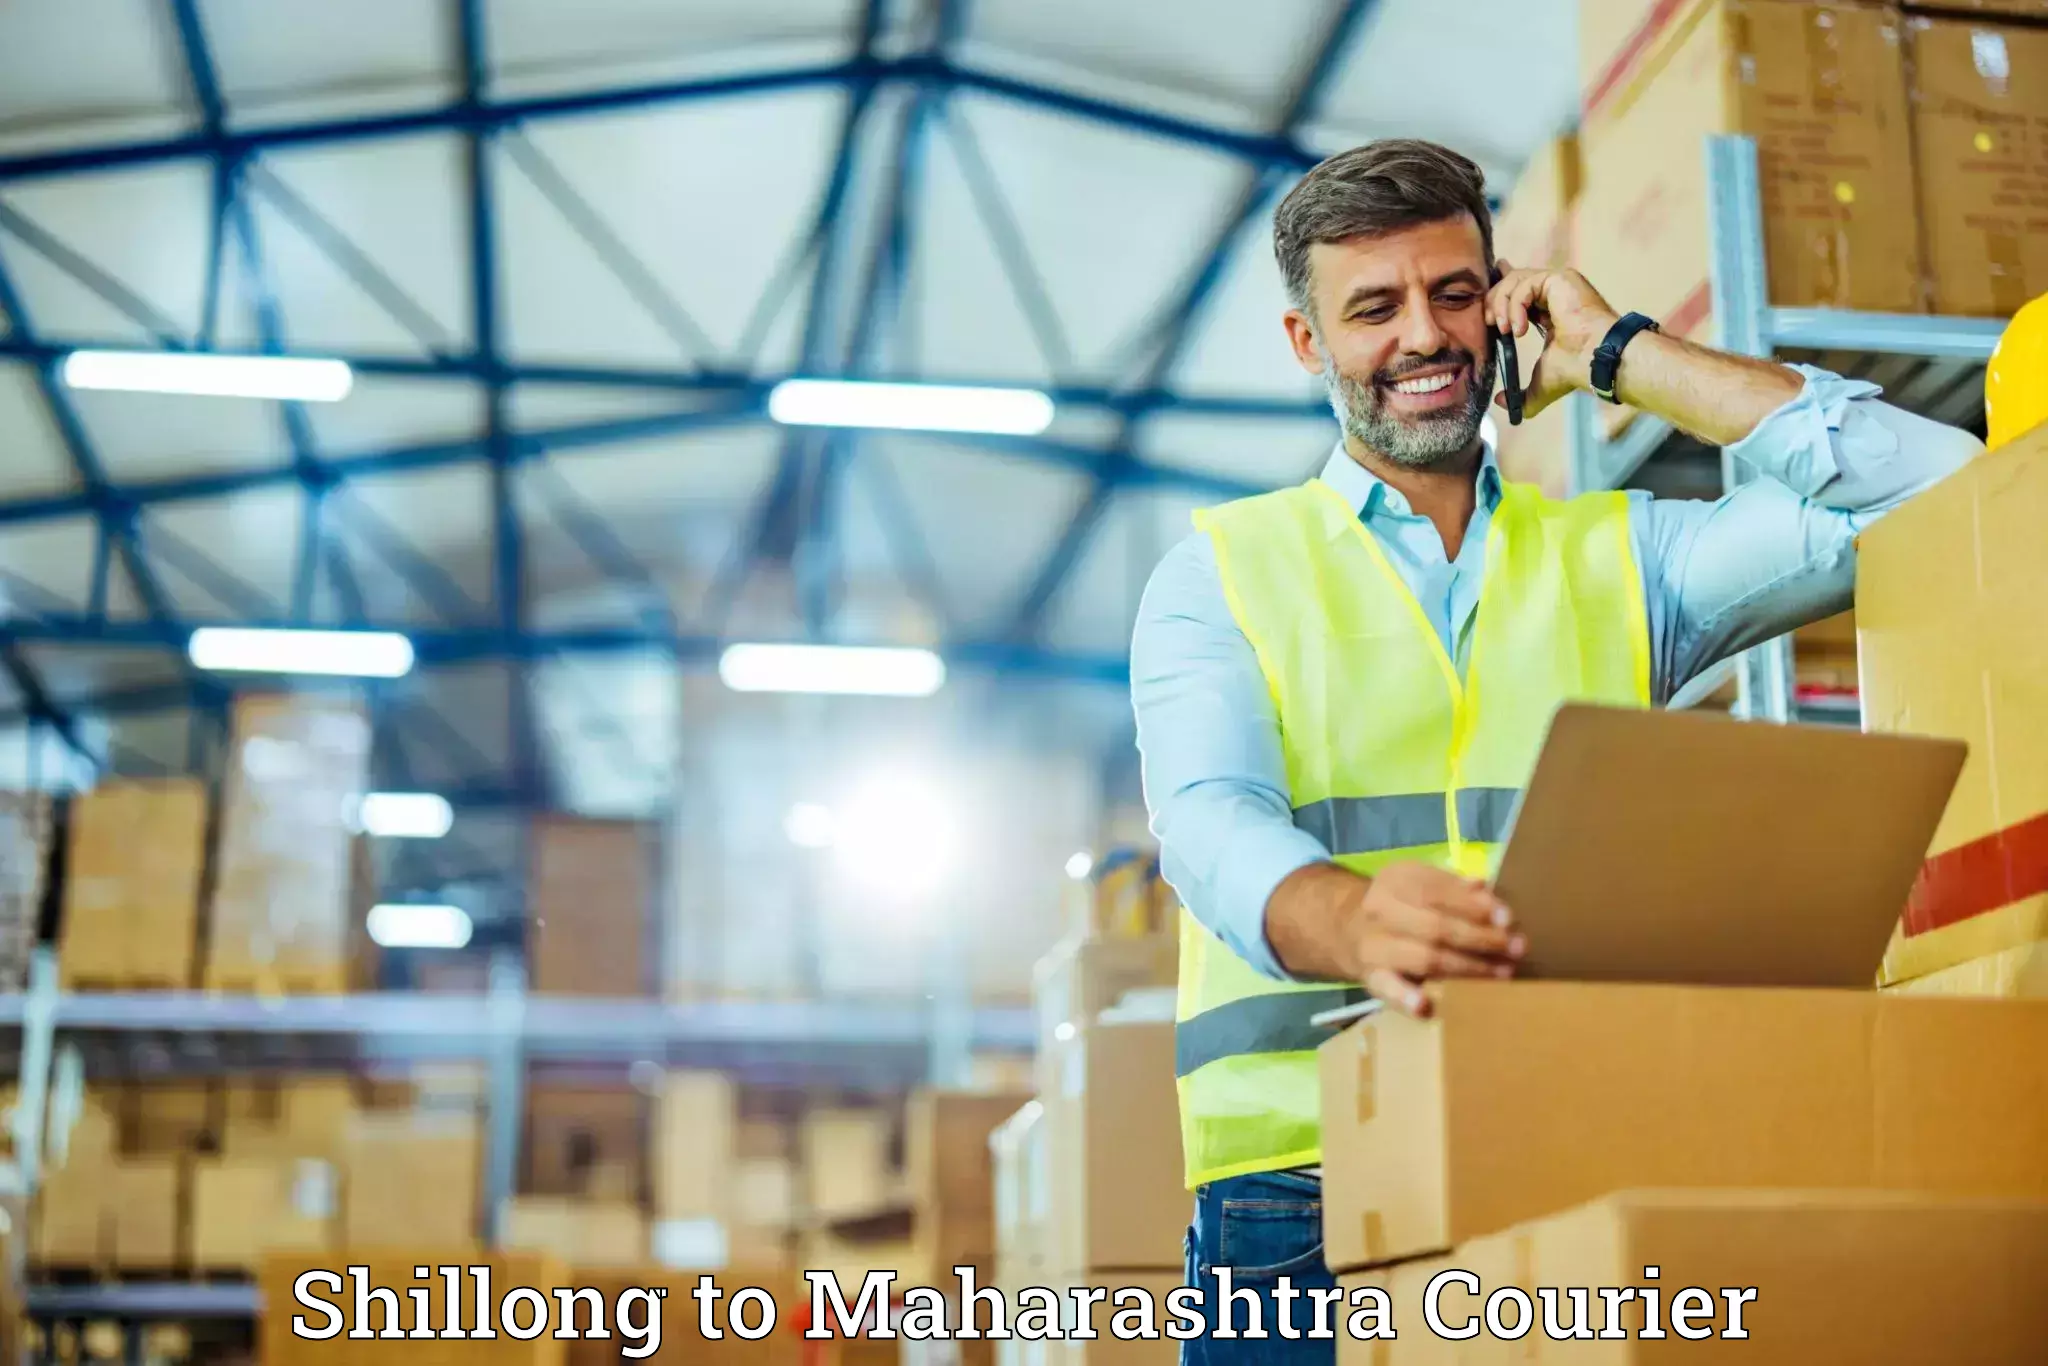 Trusted moving company Shillong to Sindhudurg